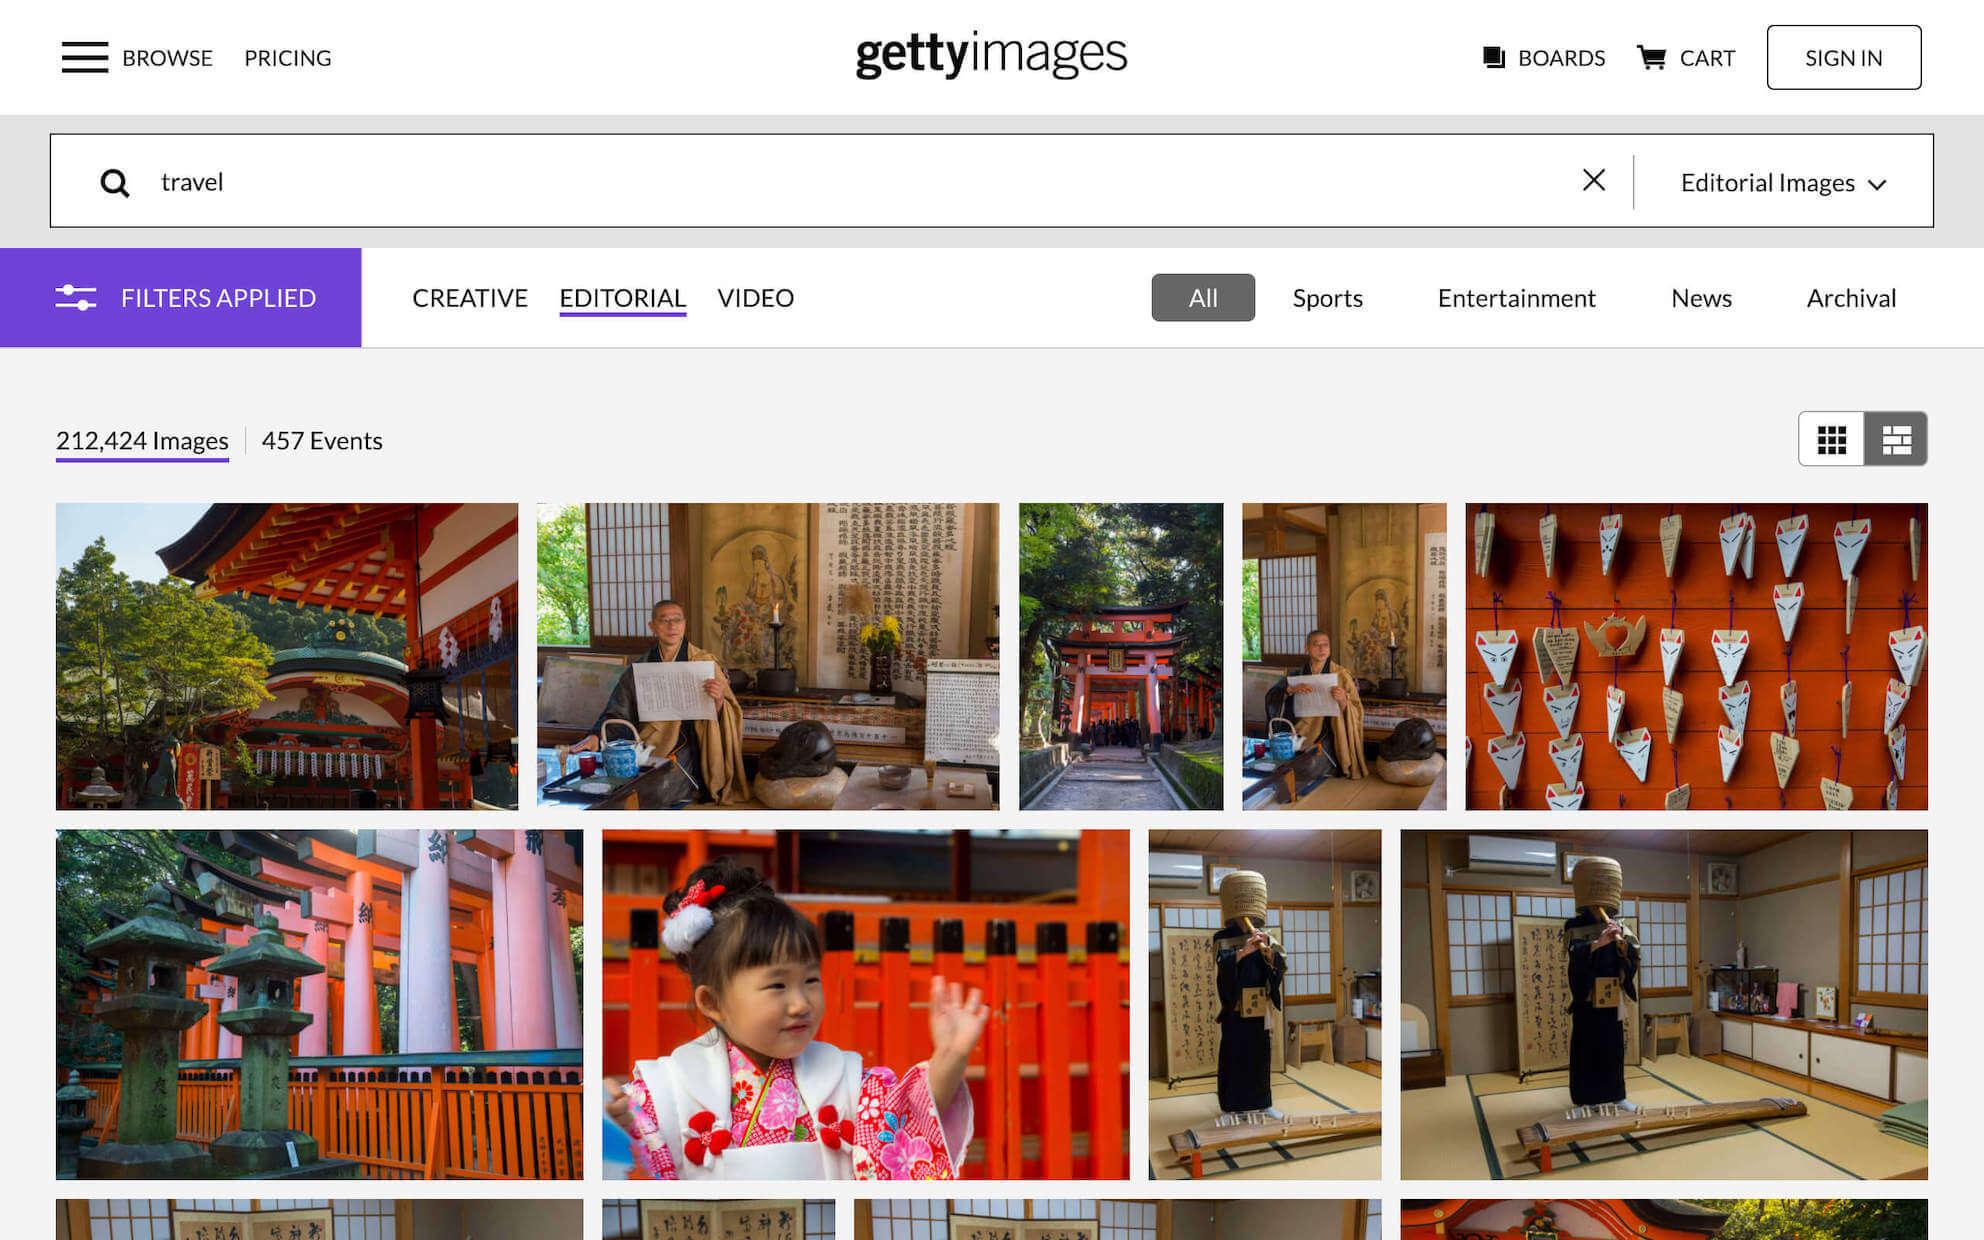 The LightRocket collection on Getty Images